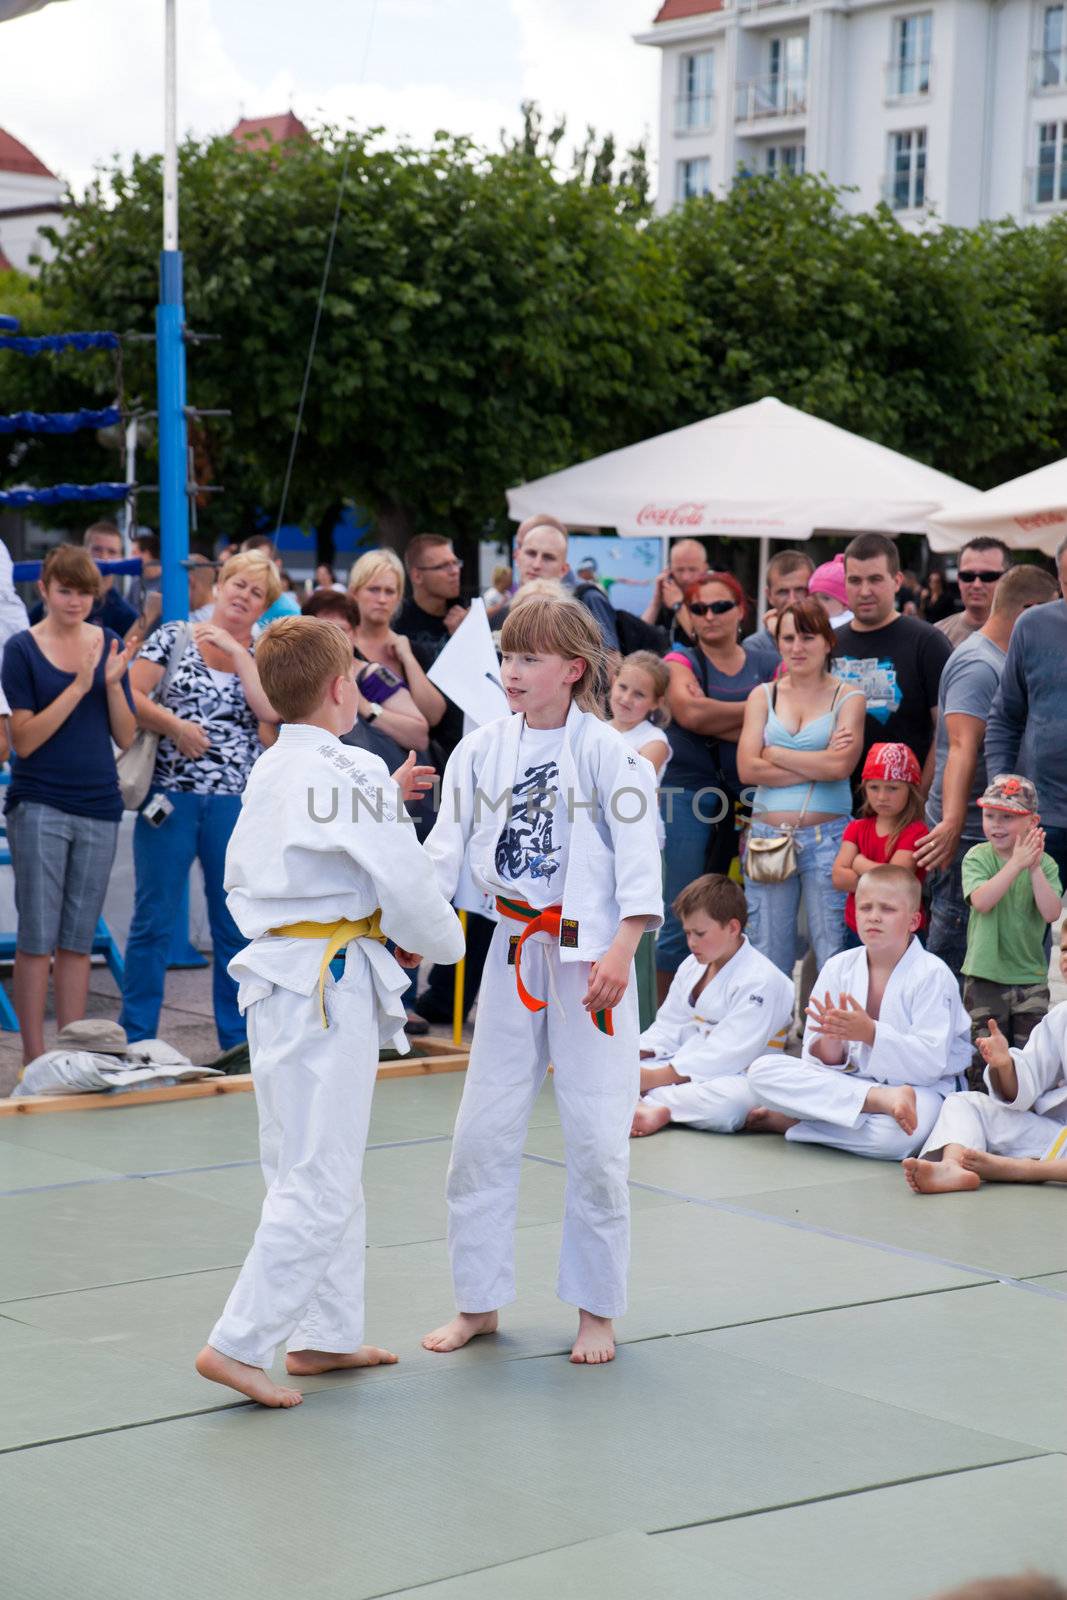 SOPOT, POLAND - JULY 16: The karate kids fighting for the competition on July 16, 2011 in Sopot, Poland by remik44992